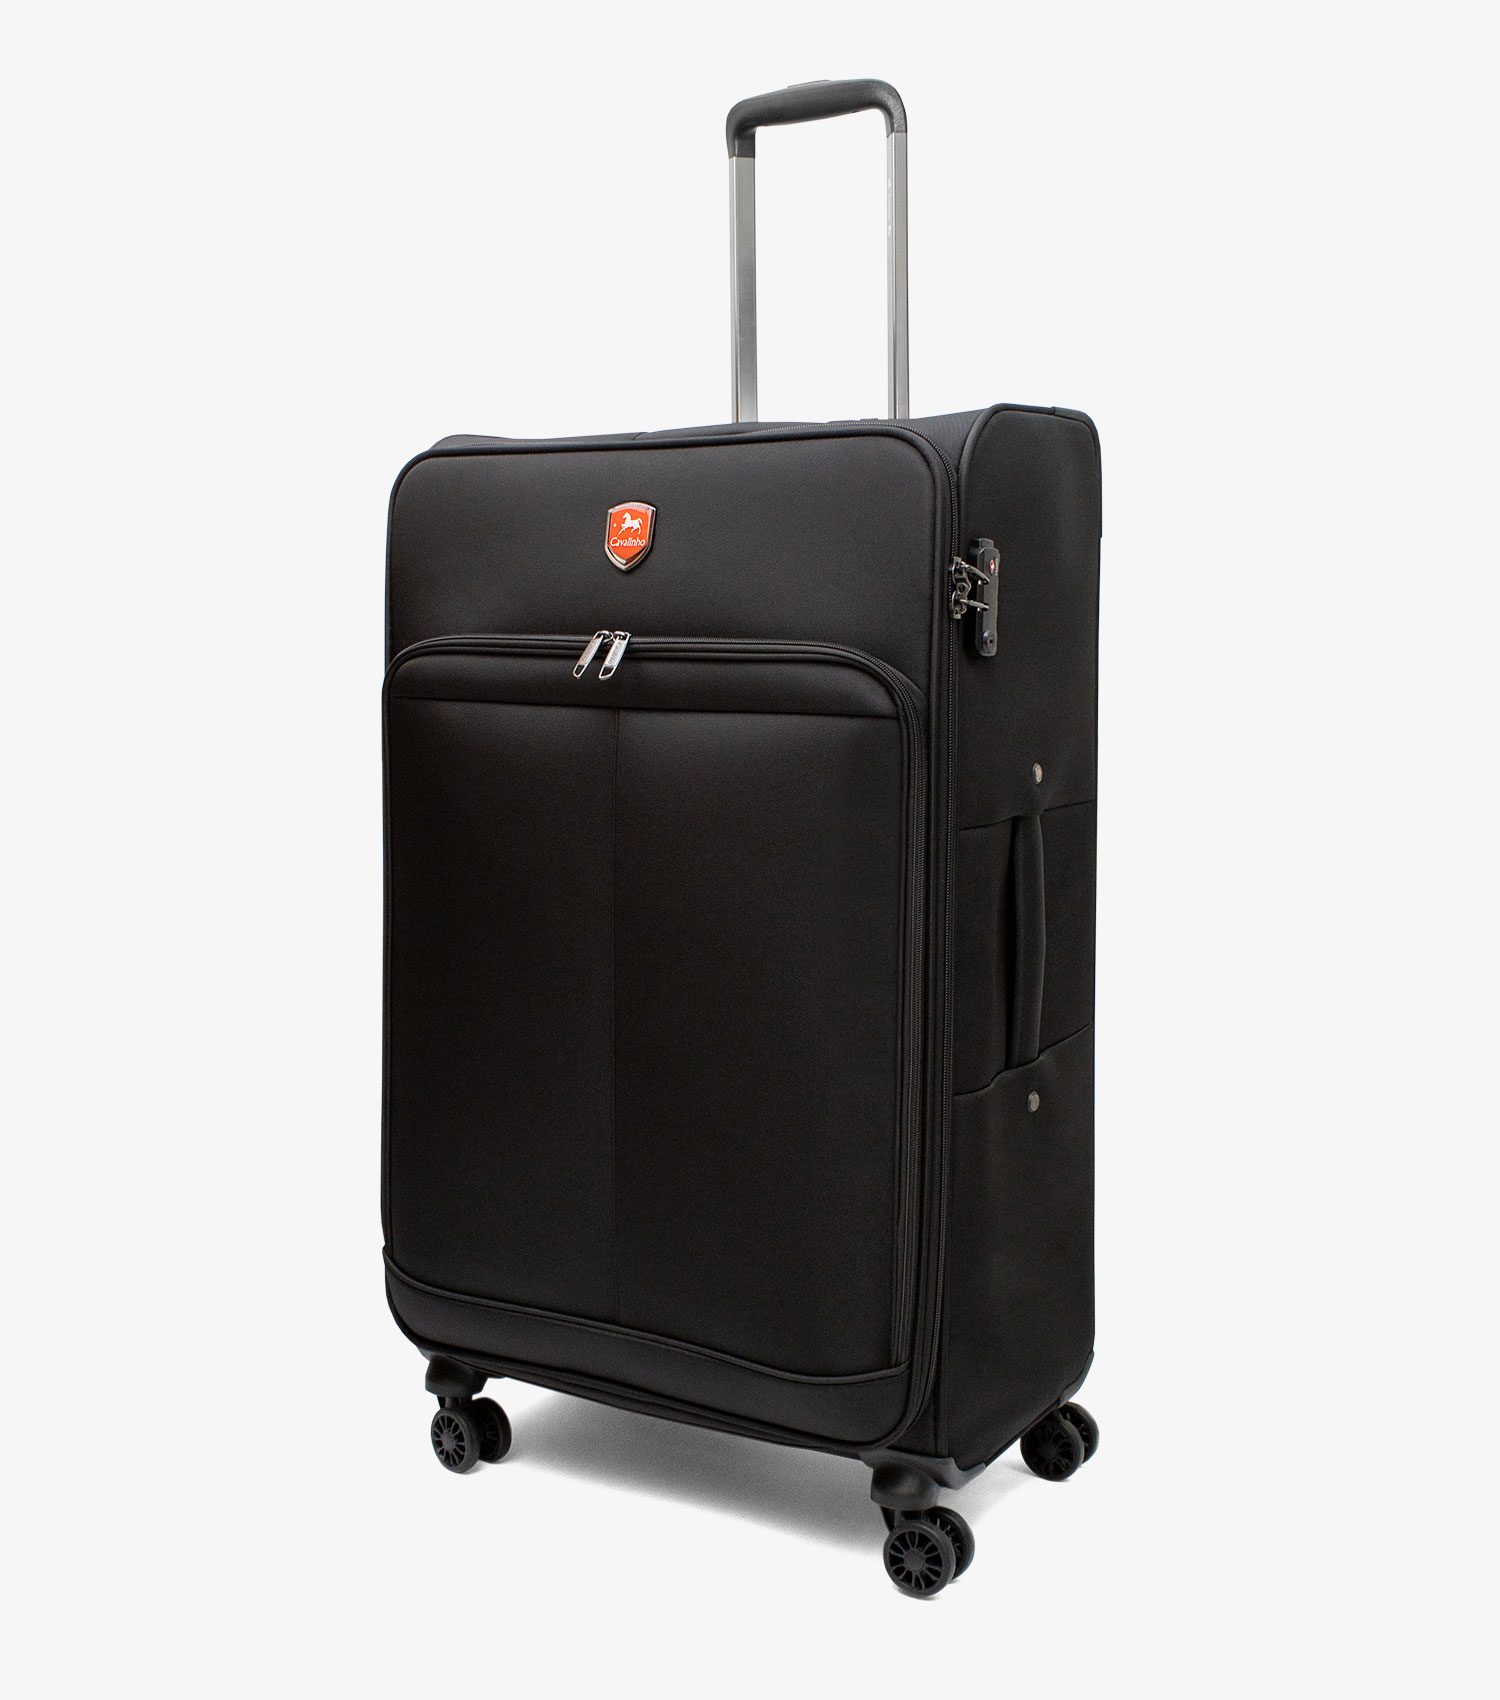 Gold Travel Wheeled Suitcases